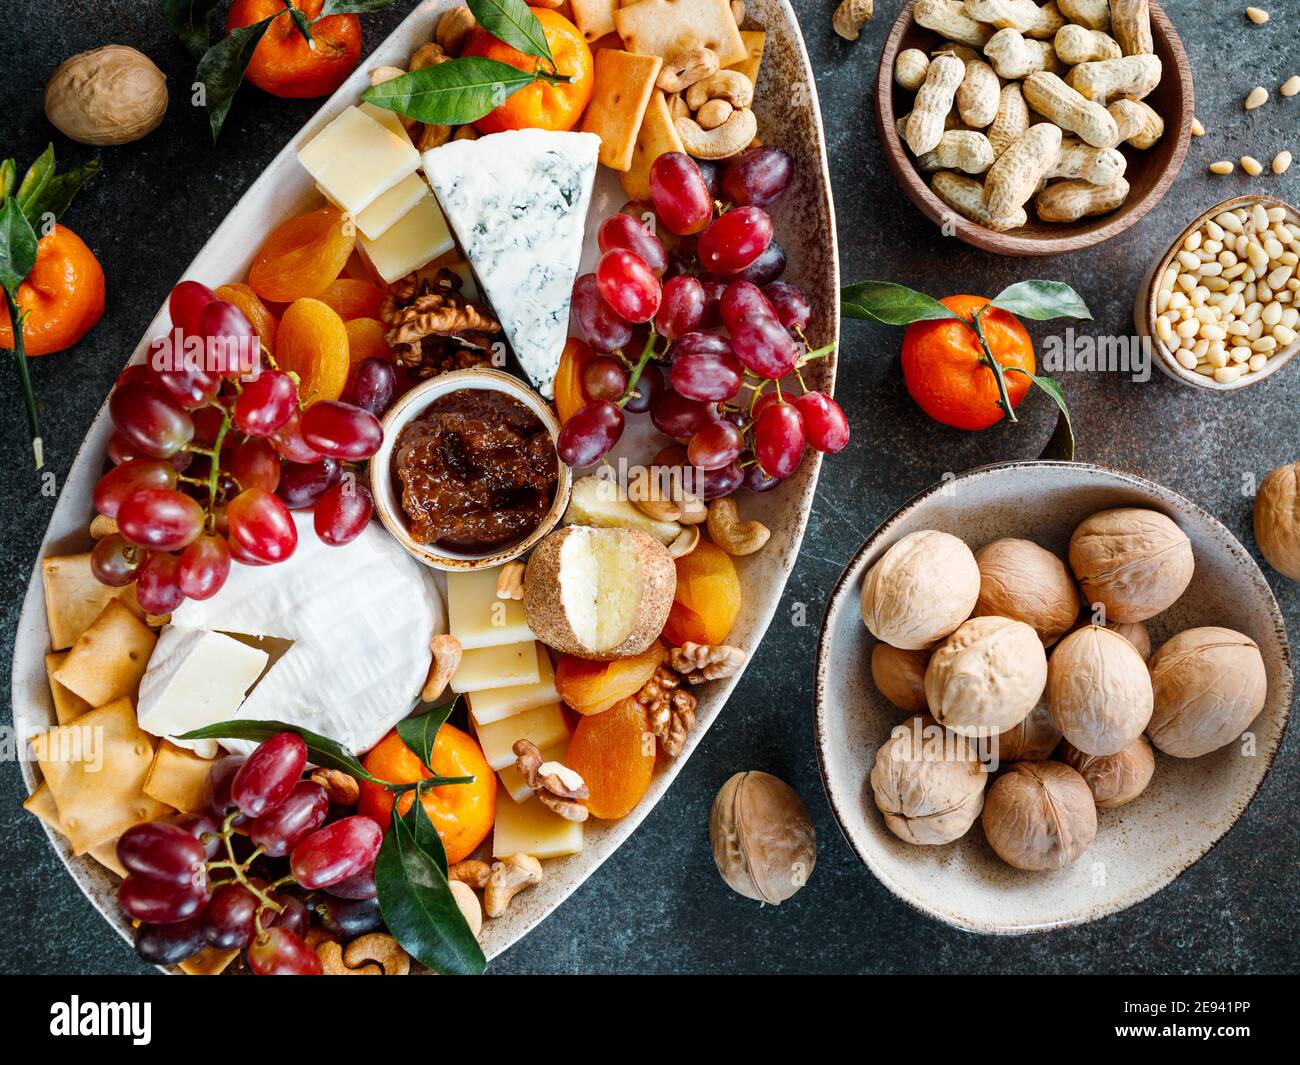 Big cheese board with appetizer assortment. Grape, cheese, nuts, jam and bread. Stock Photo